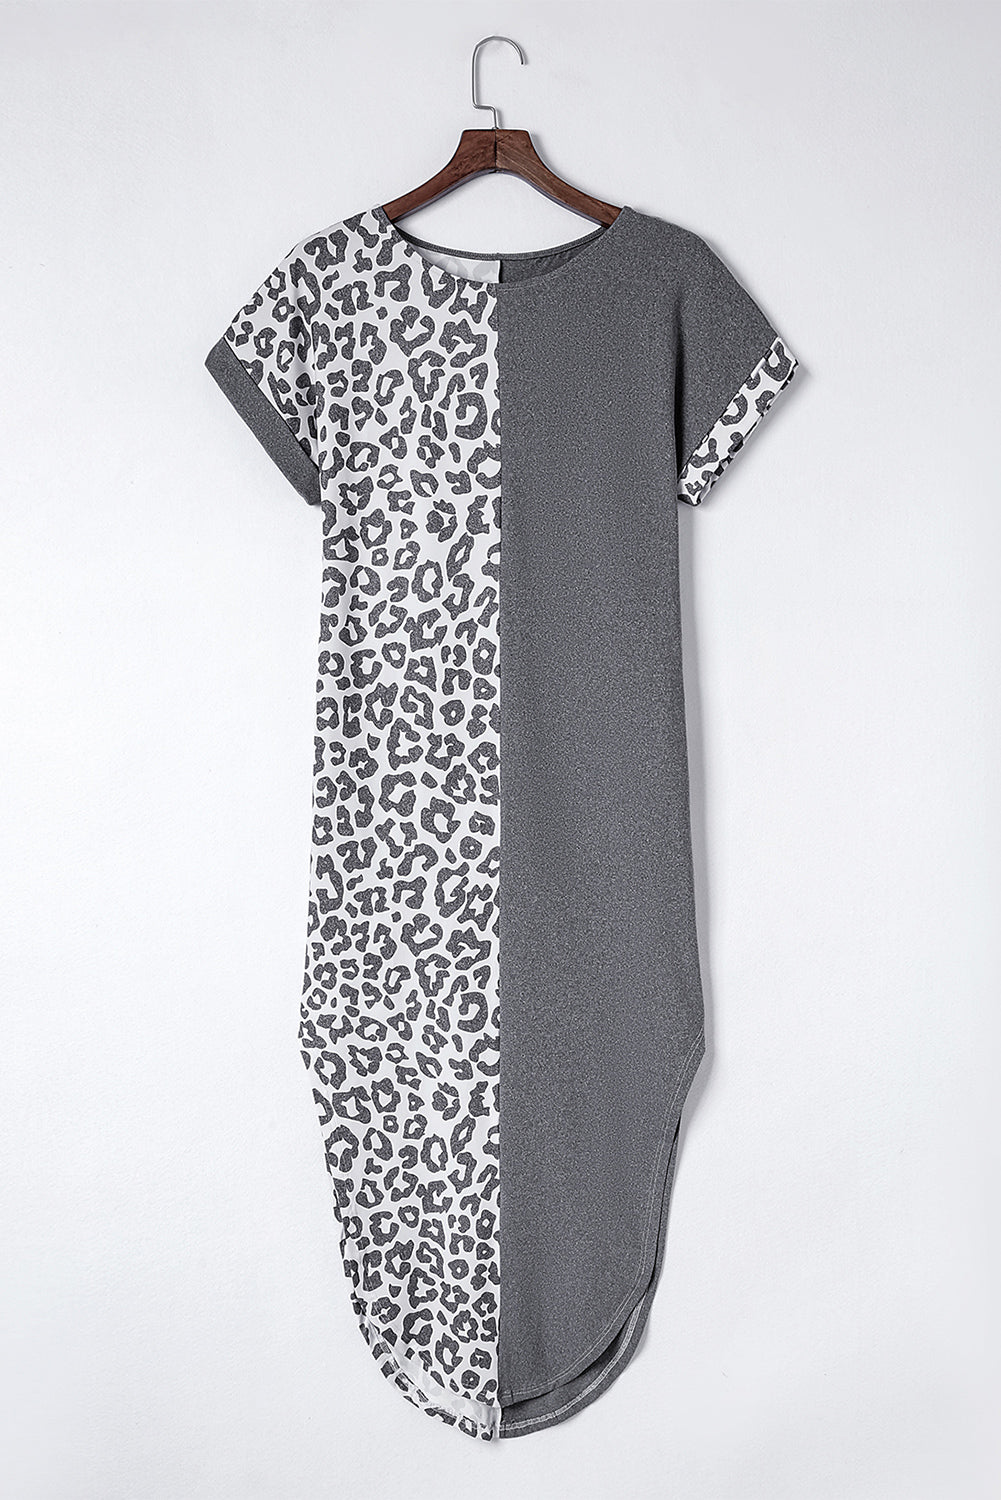 Contrast Solid Leopard Short Sleeve T-shirt Dress with Slits